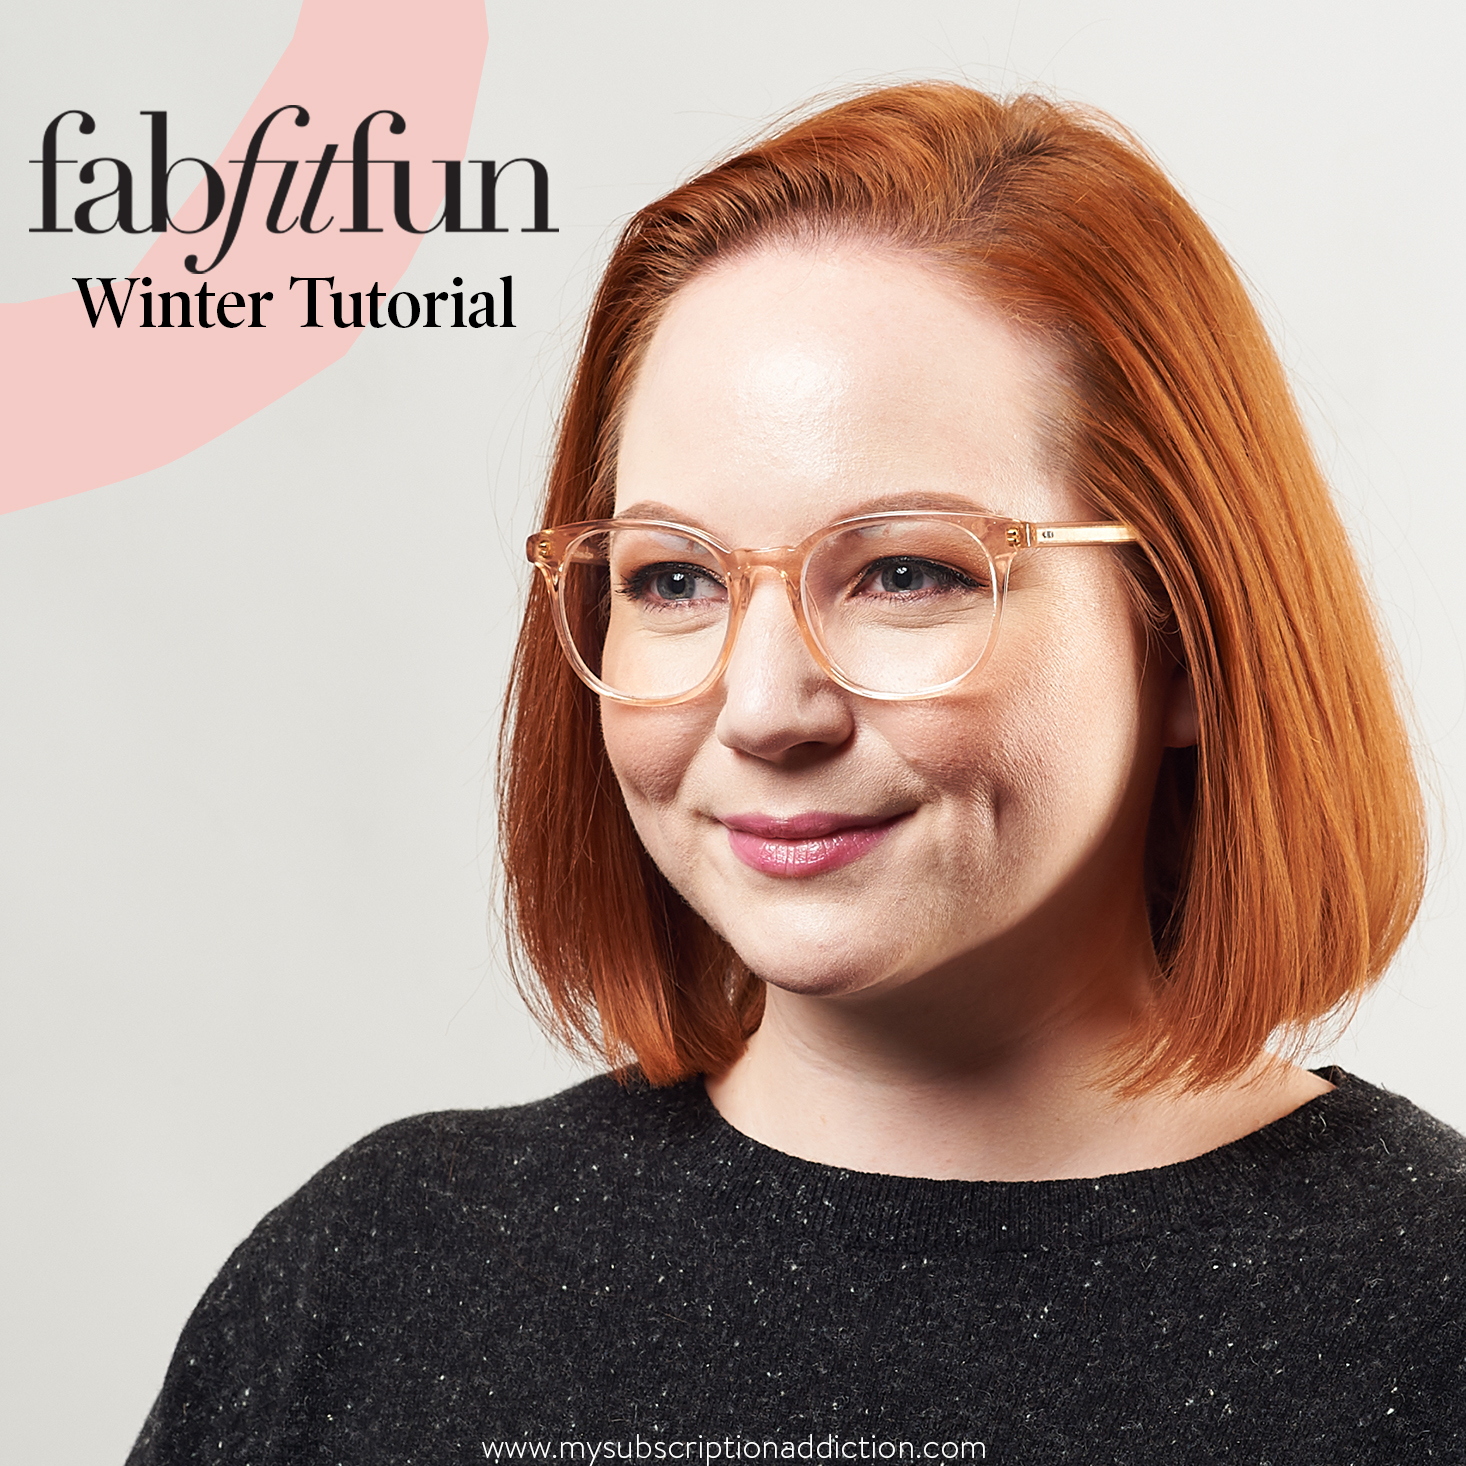 A Golden Holiday Eye Look for Glasses-Wearers feat. Our FabFitFun Palette!